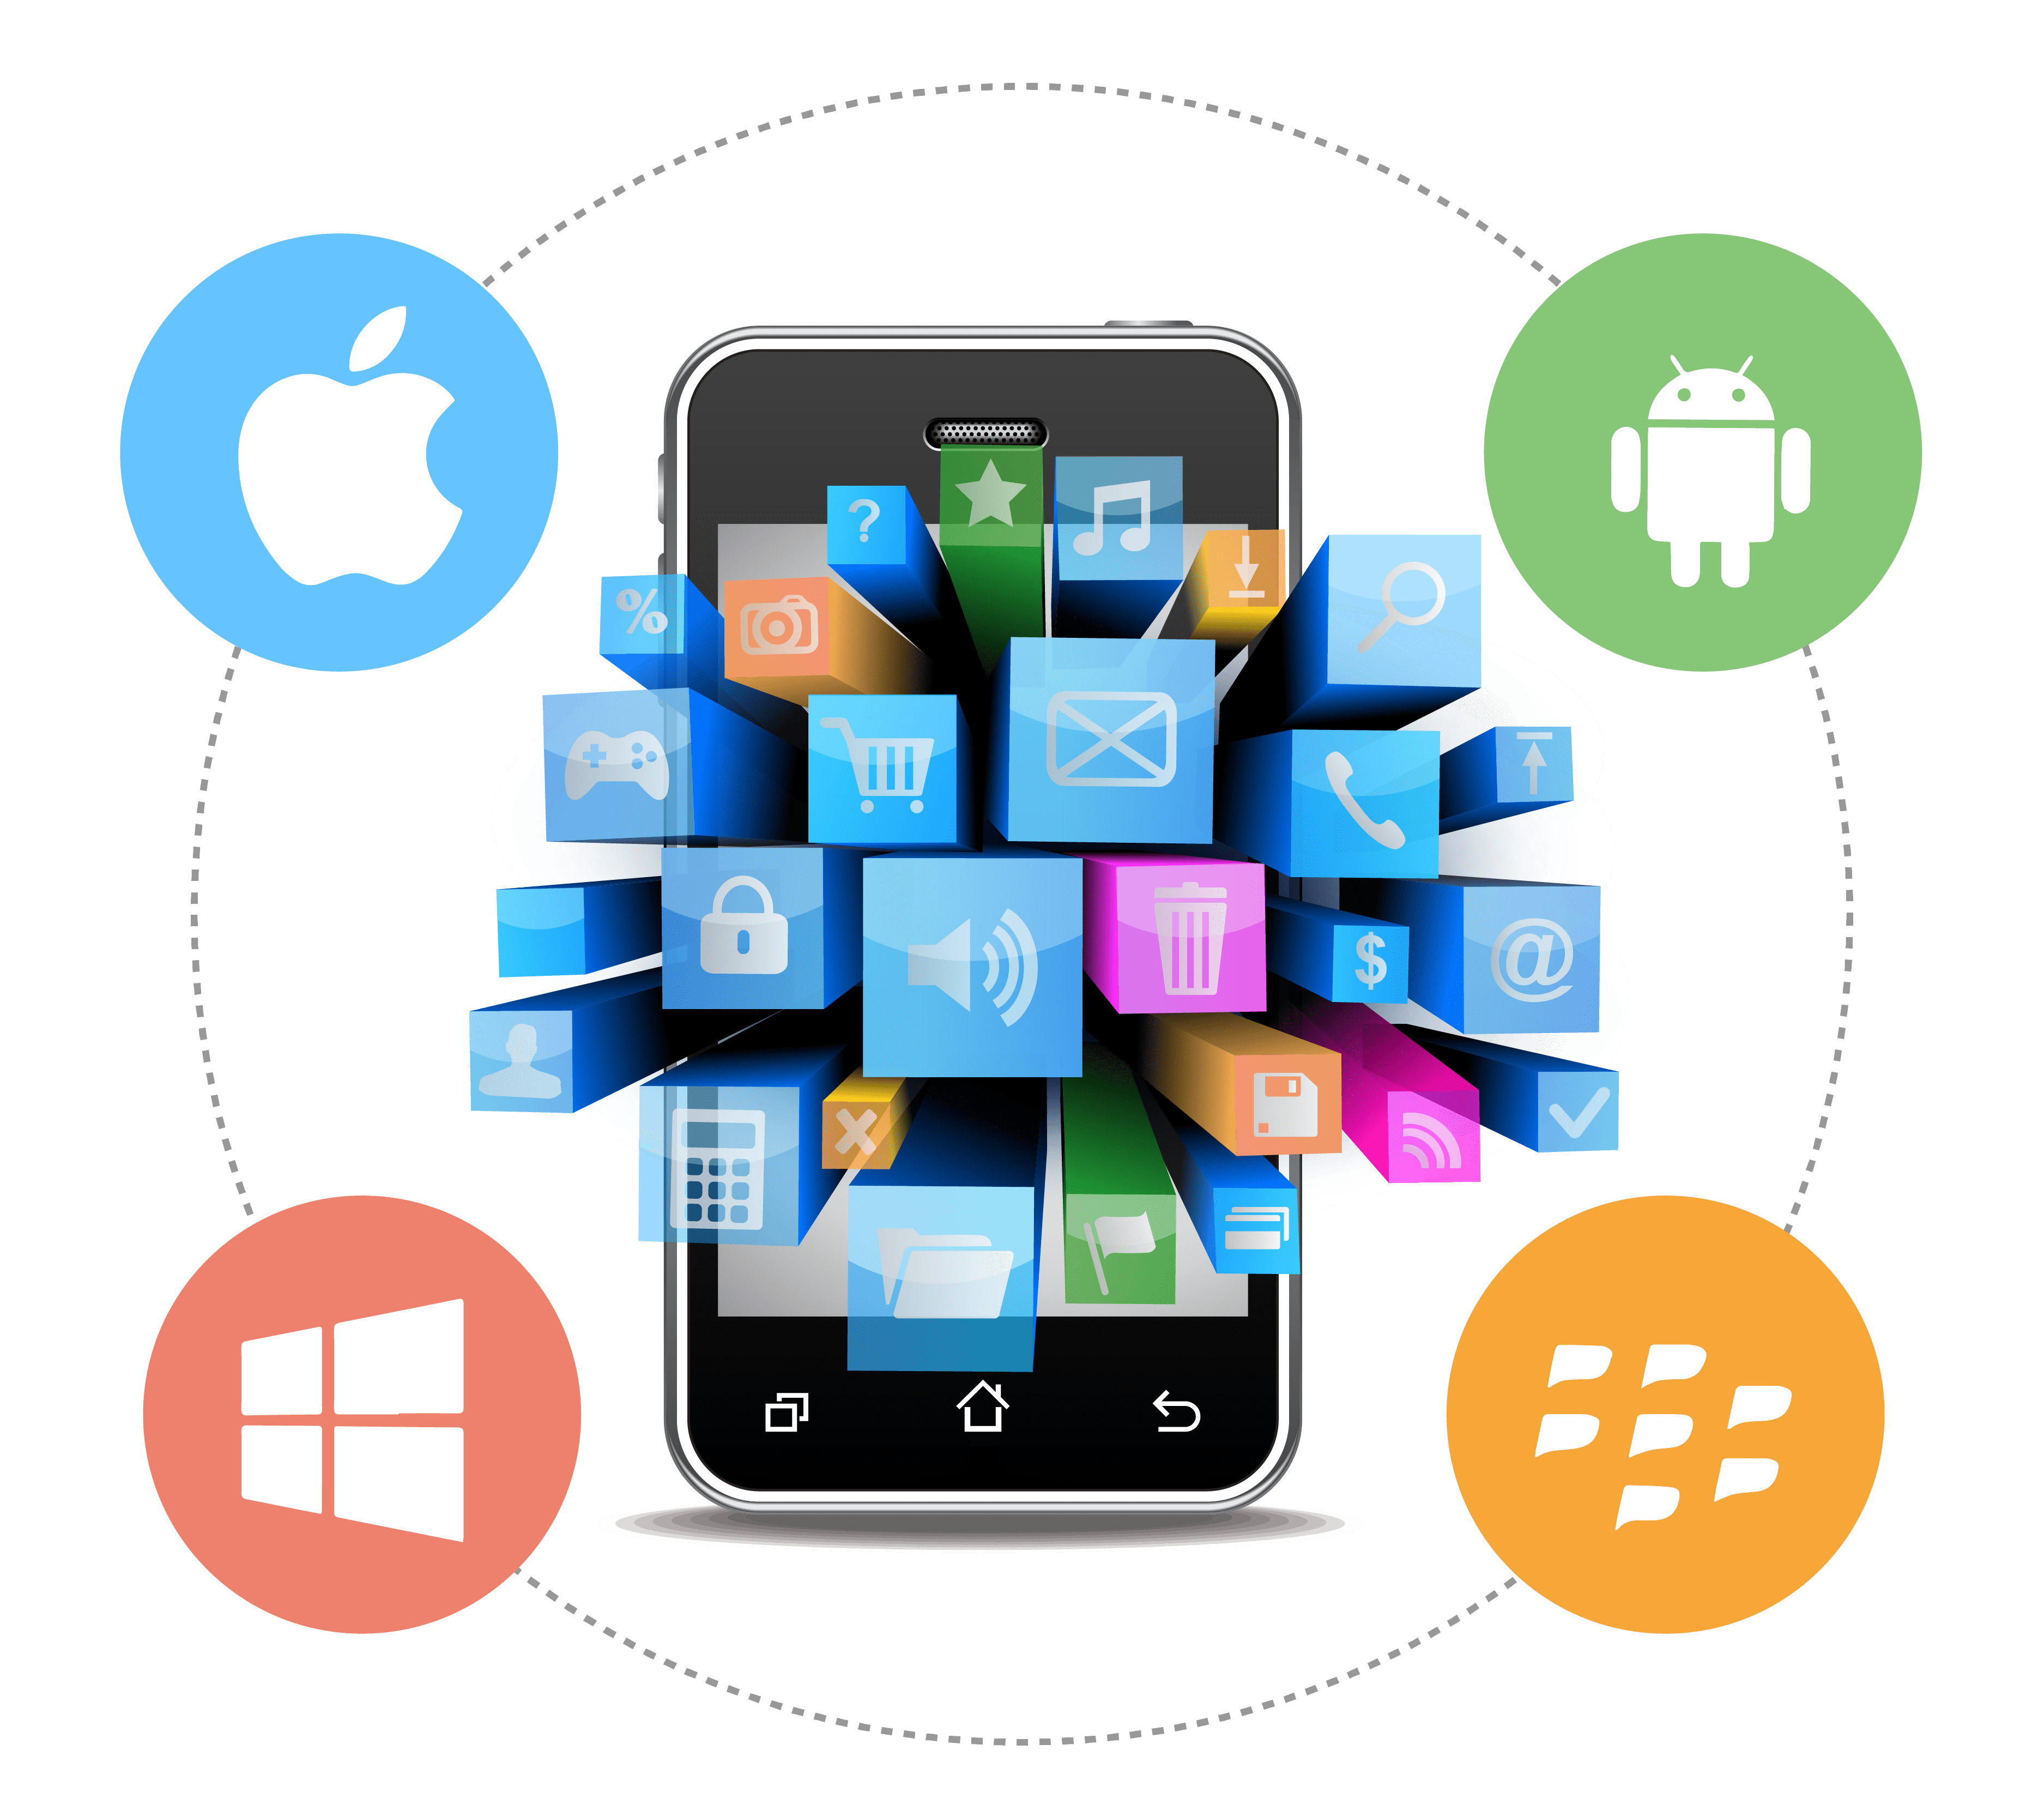 Mobile Application Development - Best Career For Tech Enthusiasts